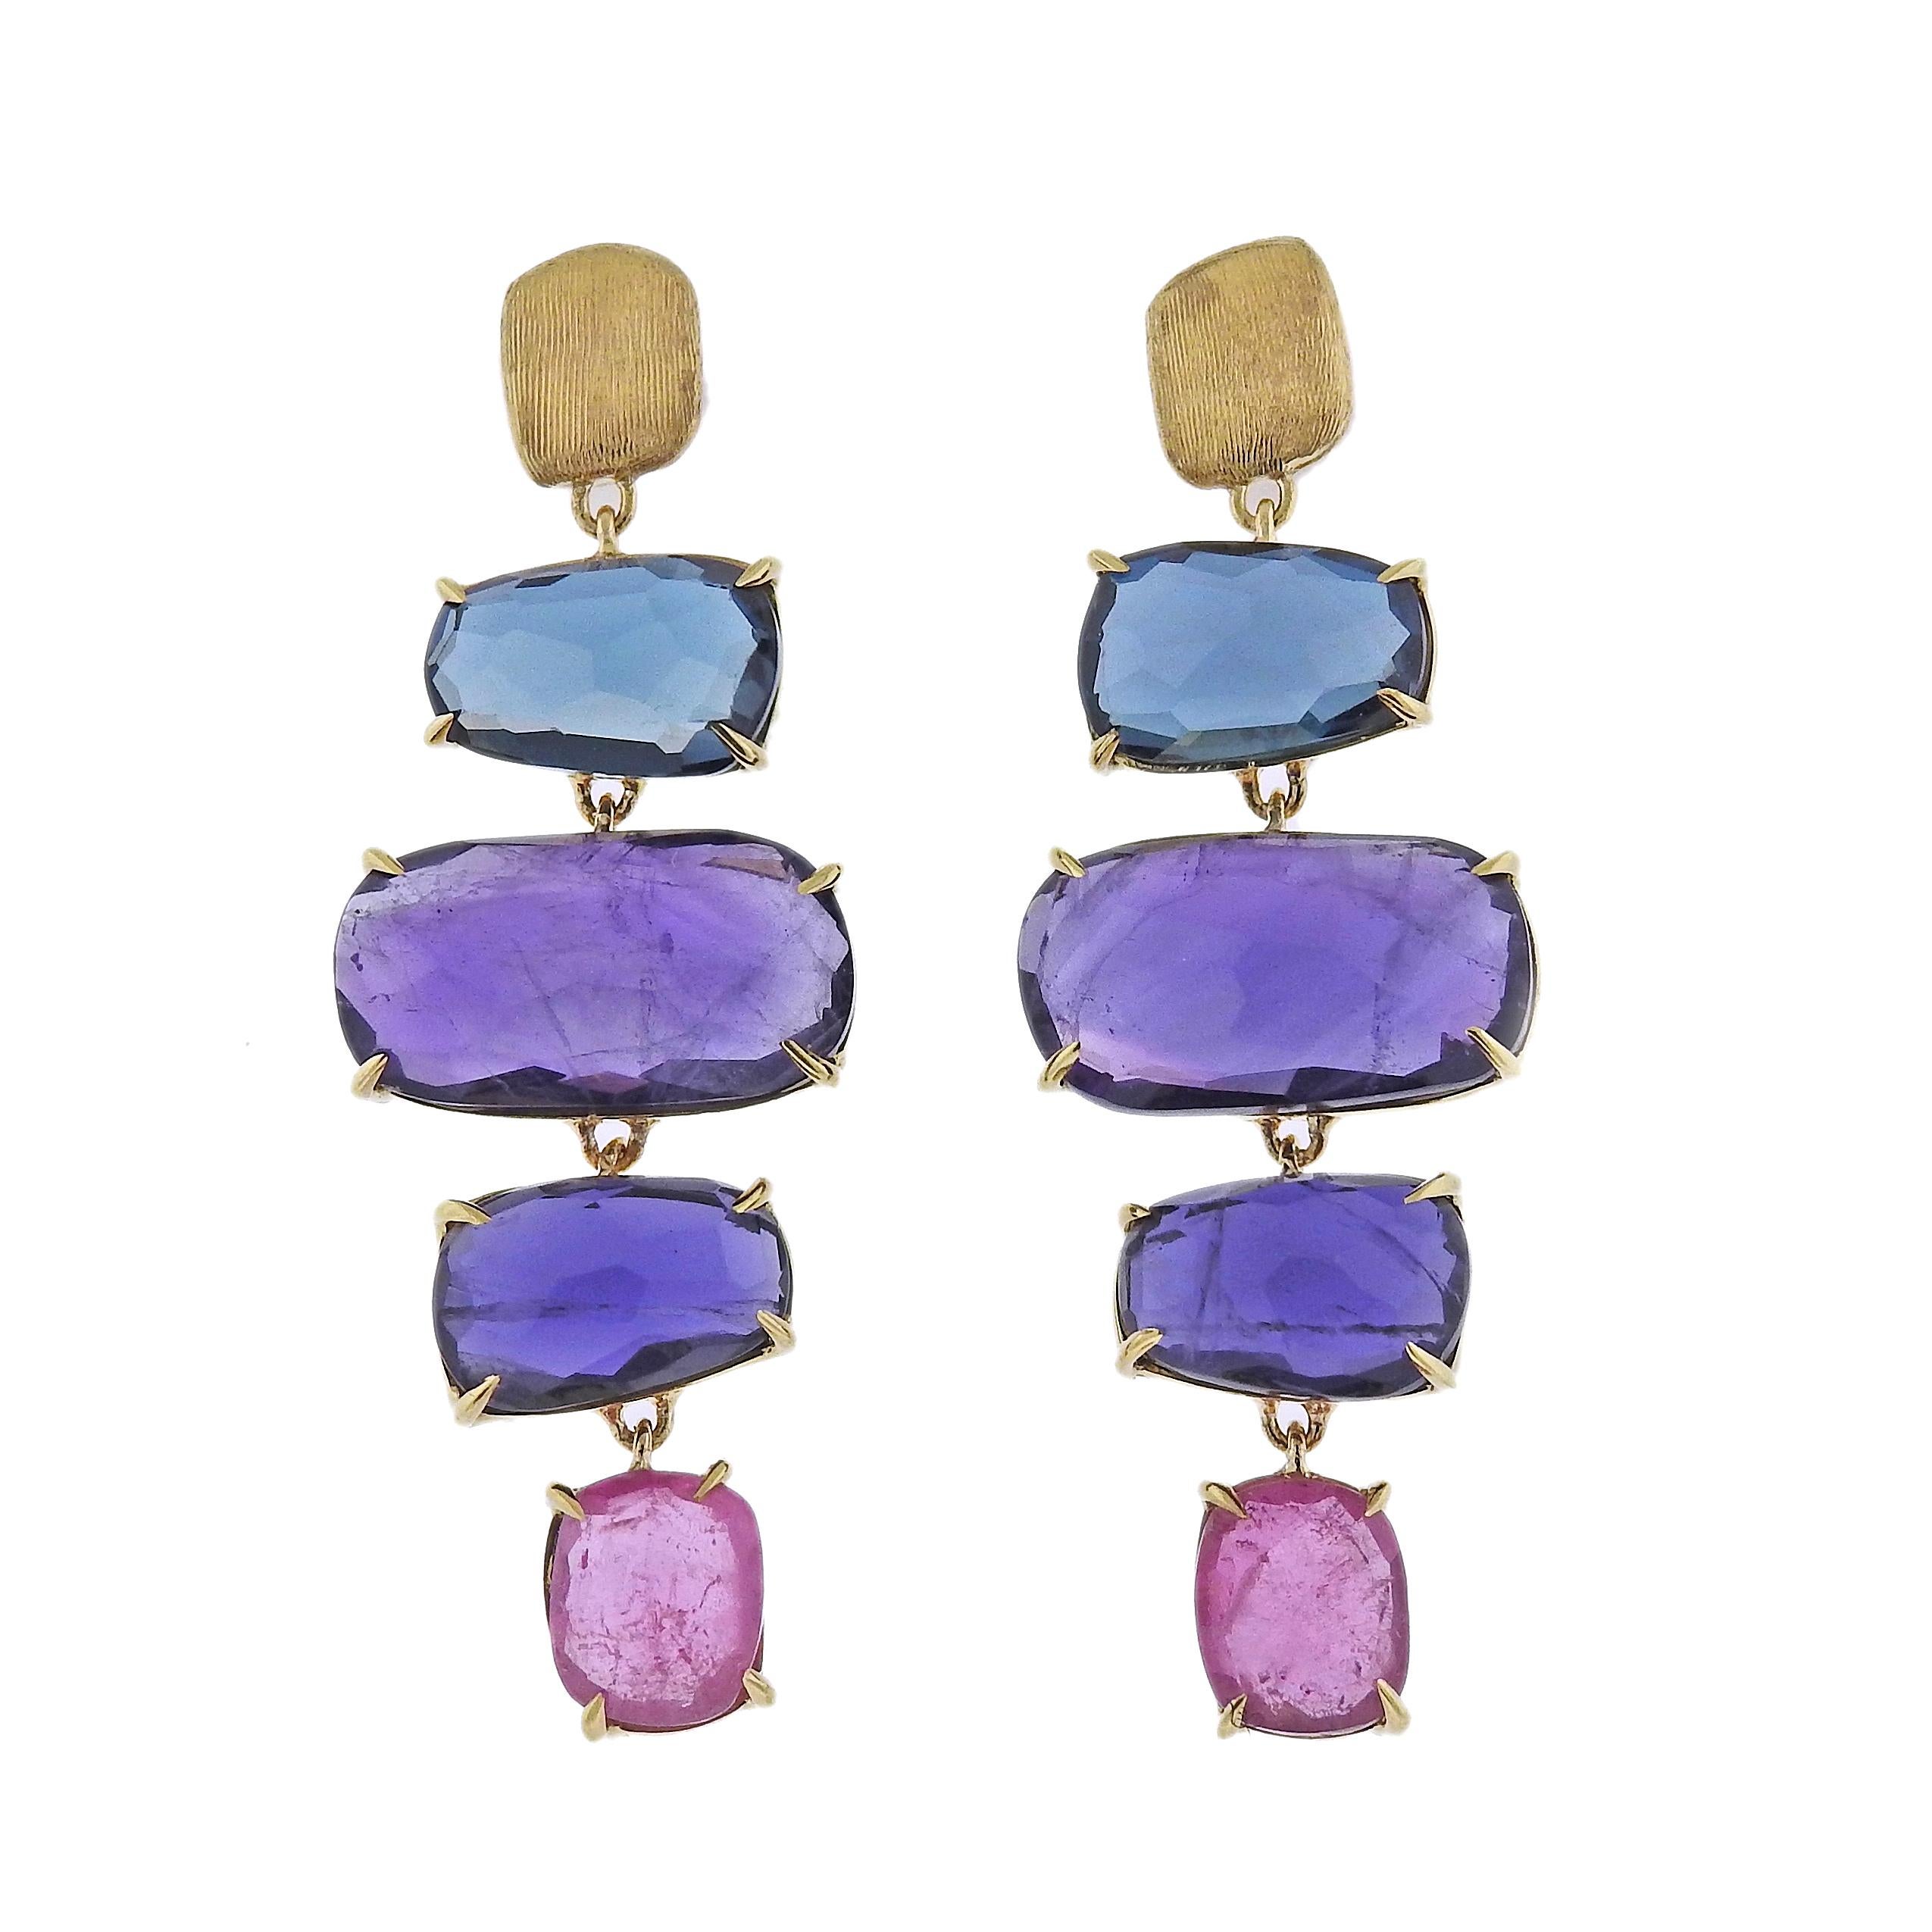 Marco Bicego Murano collection 18K yellow gold drop earrings, set with amethyst, tourmaline, topaz gemstones. Earrings measure 40mm long and 13mm at the widest point. Marked: Marco Bicego, Made in Italy, 750. Weight is 8.3 grams.